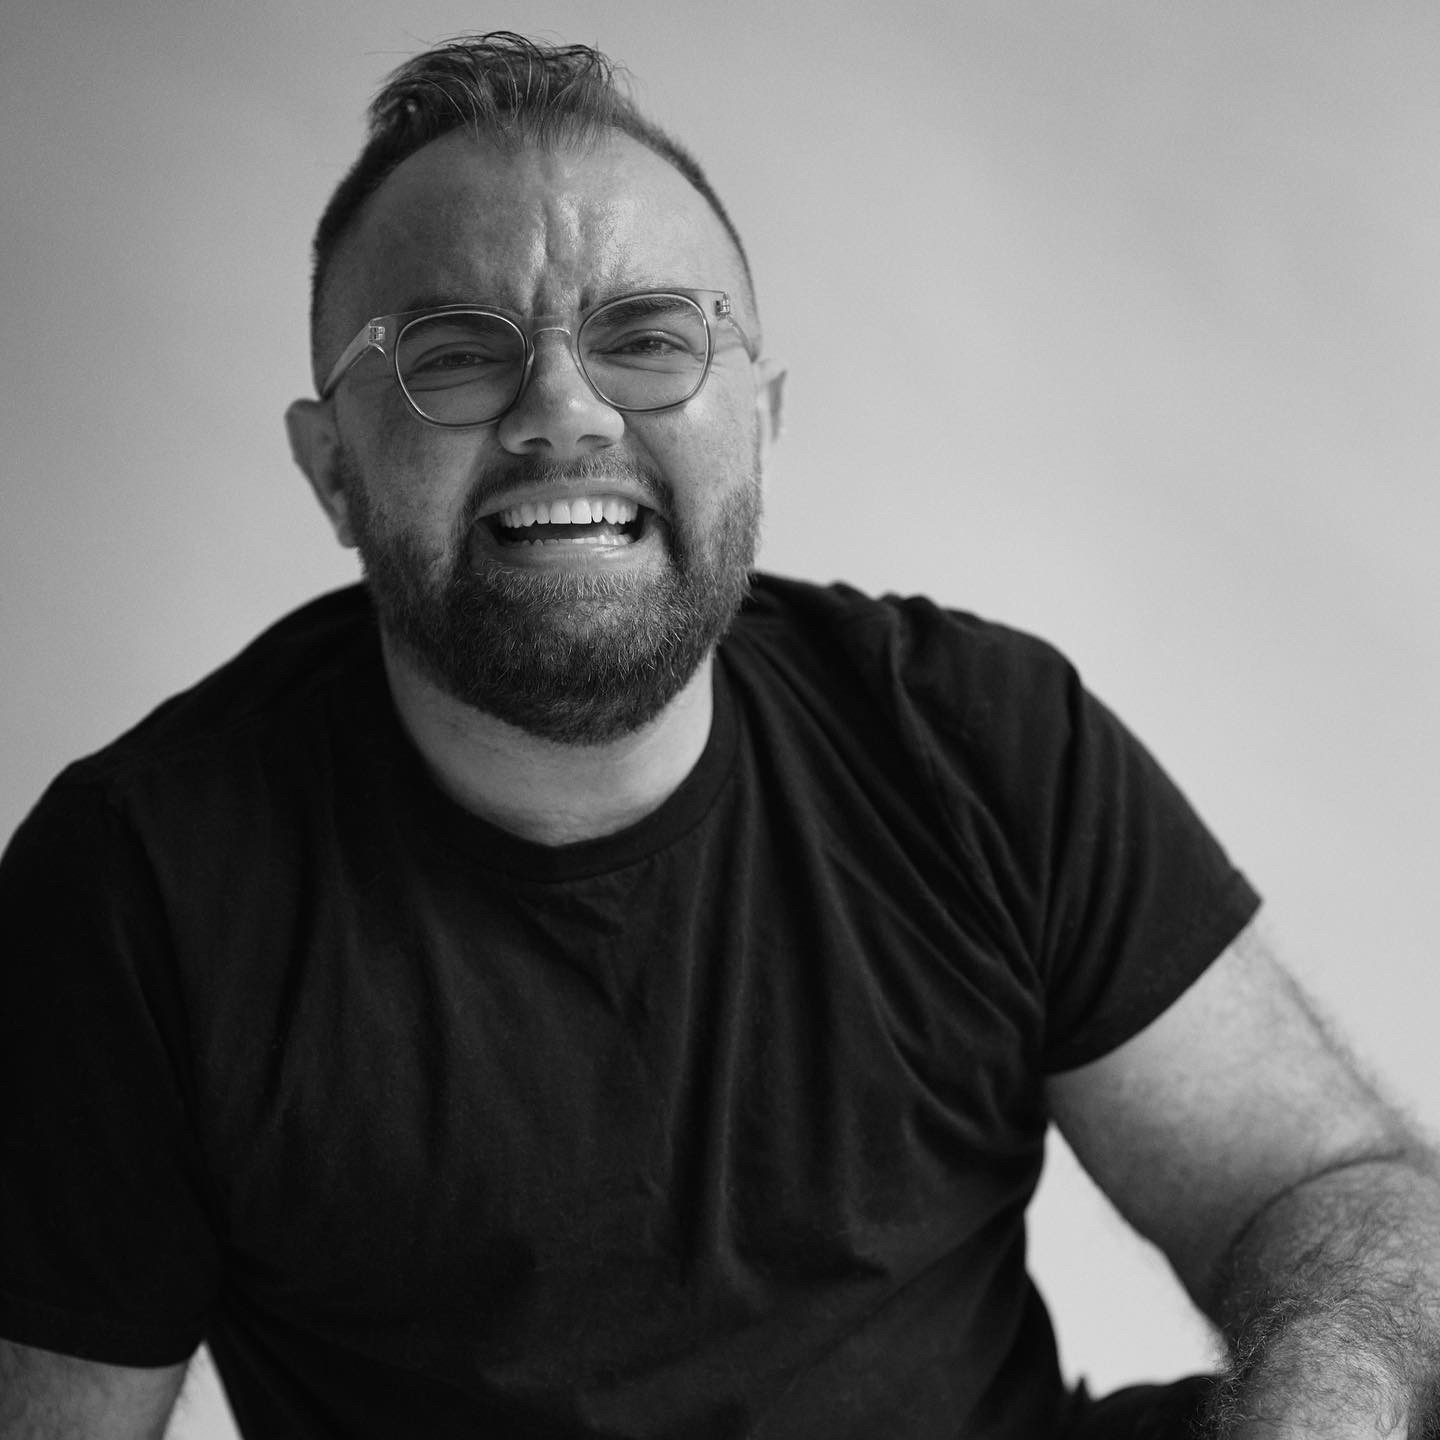 Black and white photo of a nonbinary person with short hair and facial hair, glasses, and a dark t-shirt smiling at the camera in front of a lighter background.